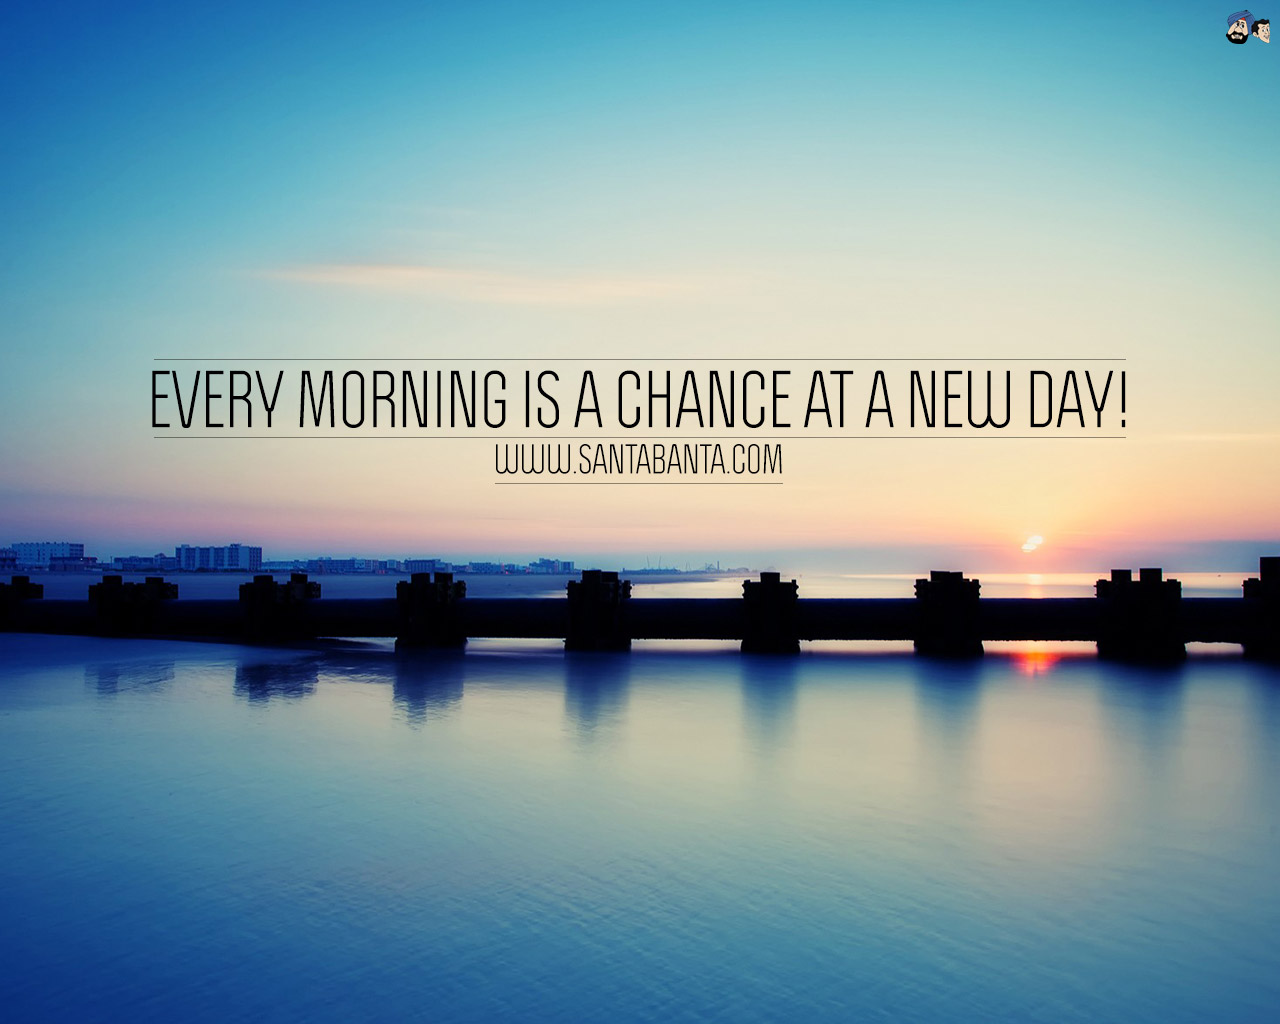 Good Morning - New Day New Chances - HD Wallpaper 